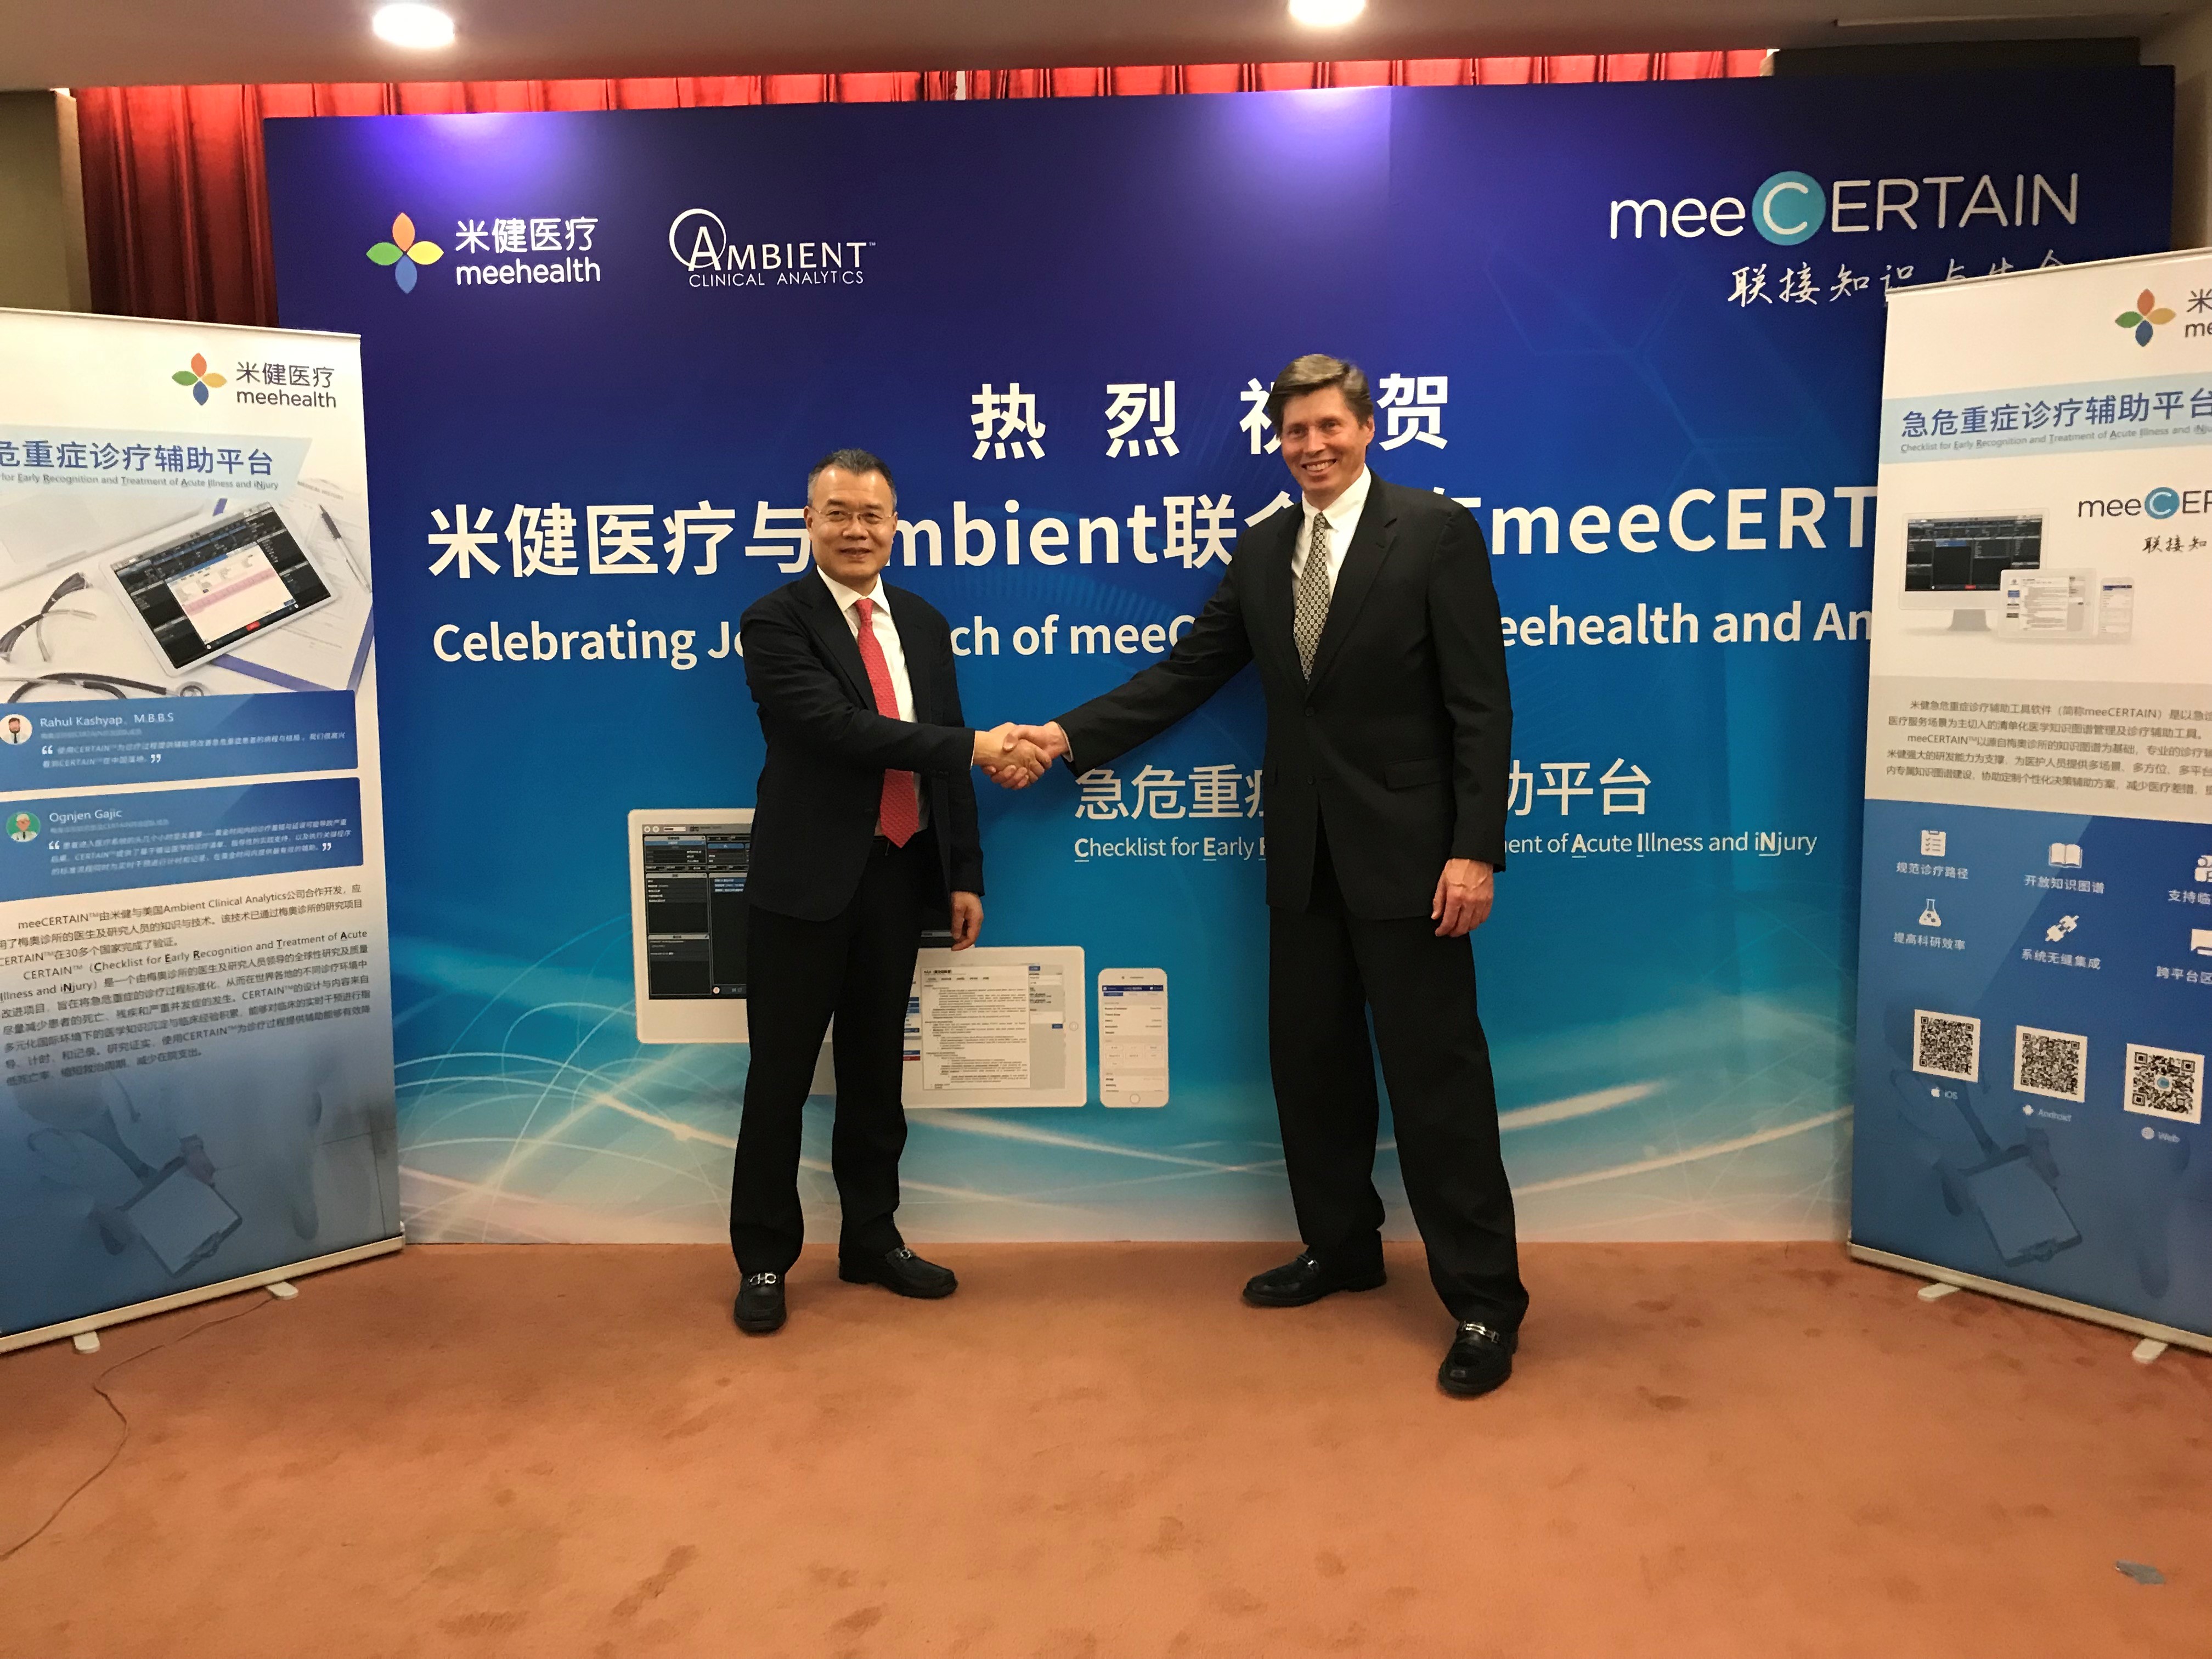 Al Berning, CEO of Ambient Clinical Analytics and Dr. Zhang Jiwu, CEO of Meehealth